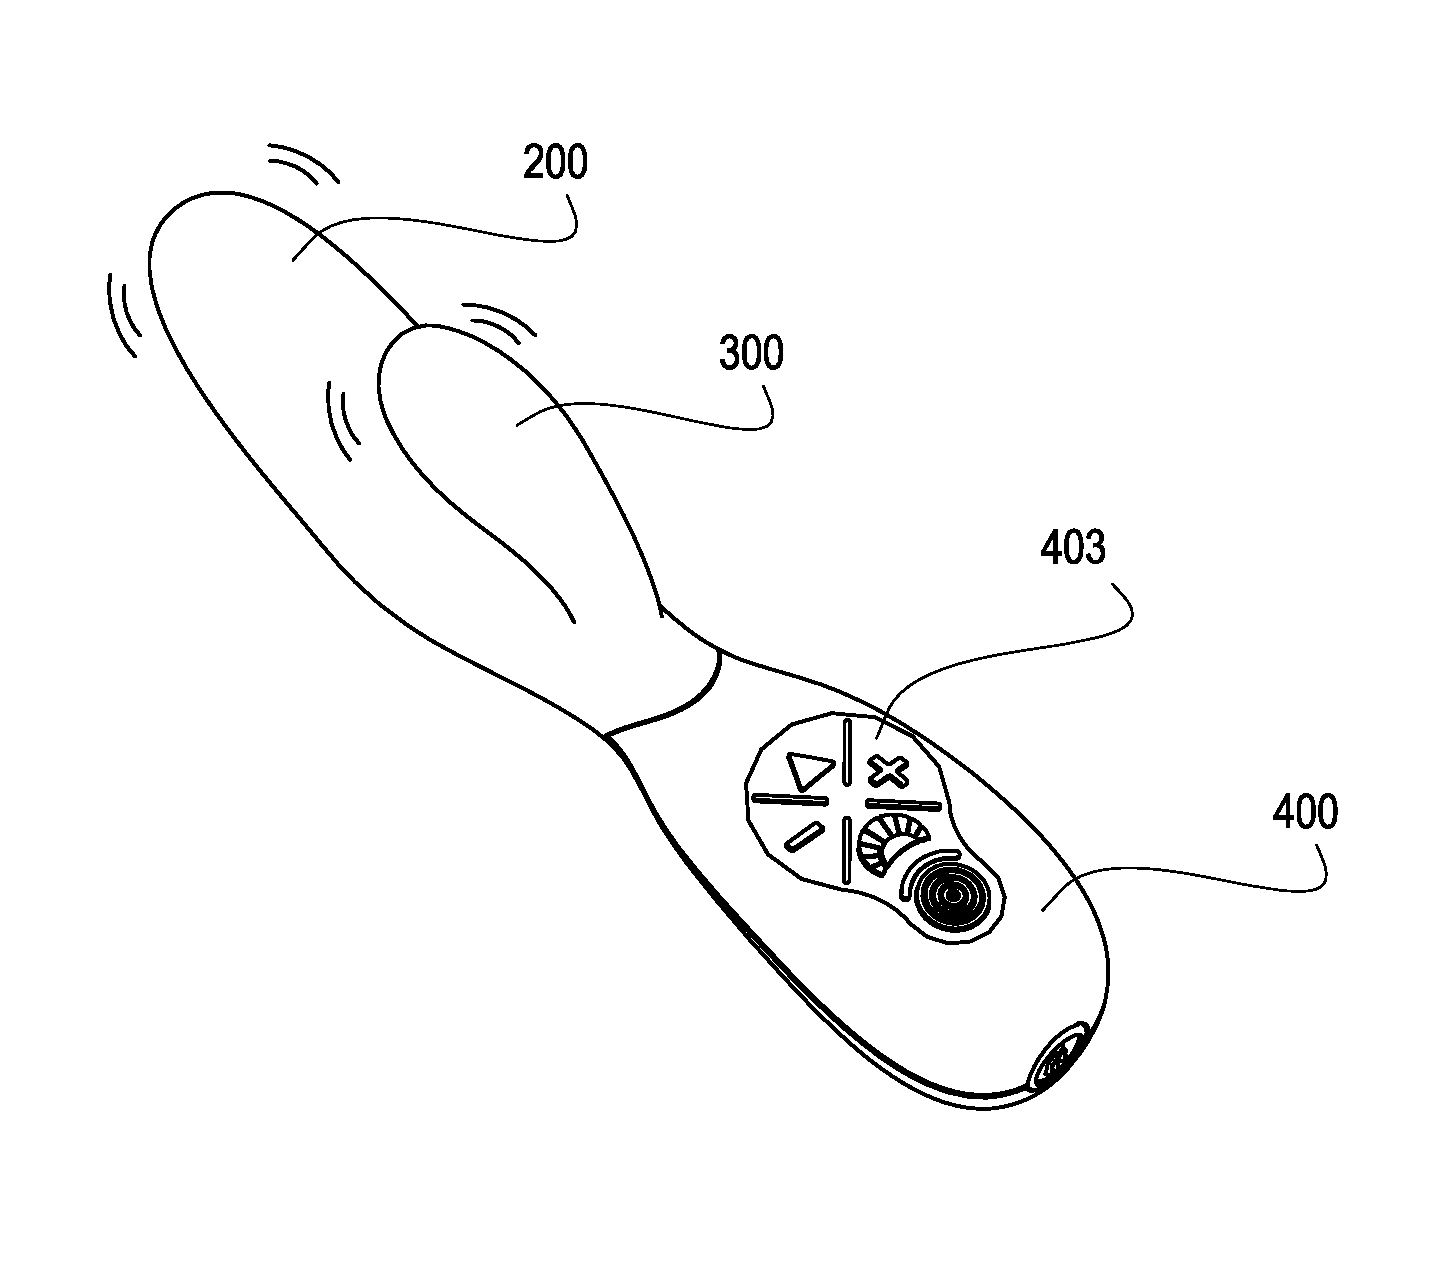 Sexual stimulation device using light therapy